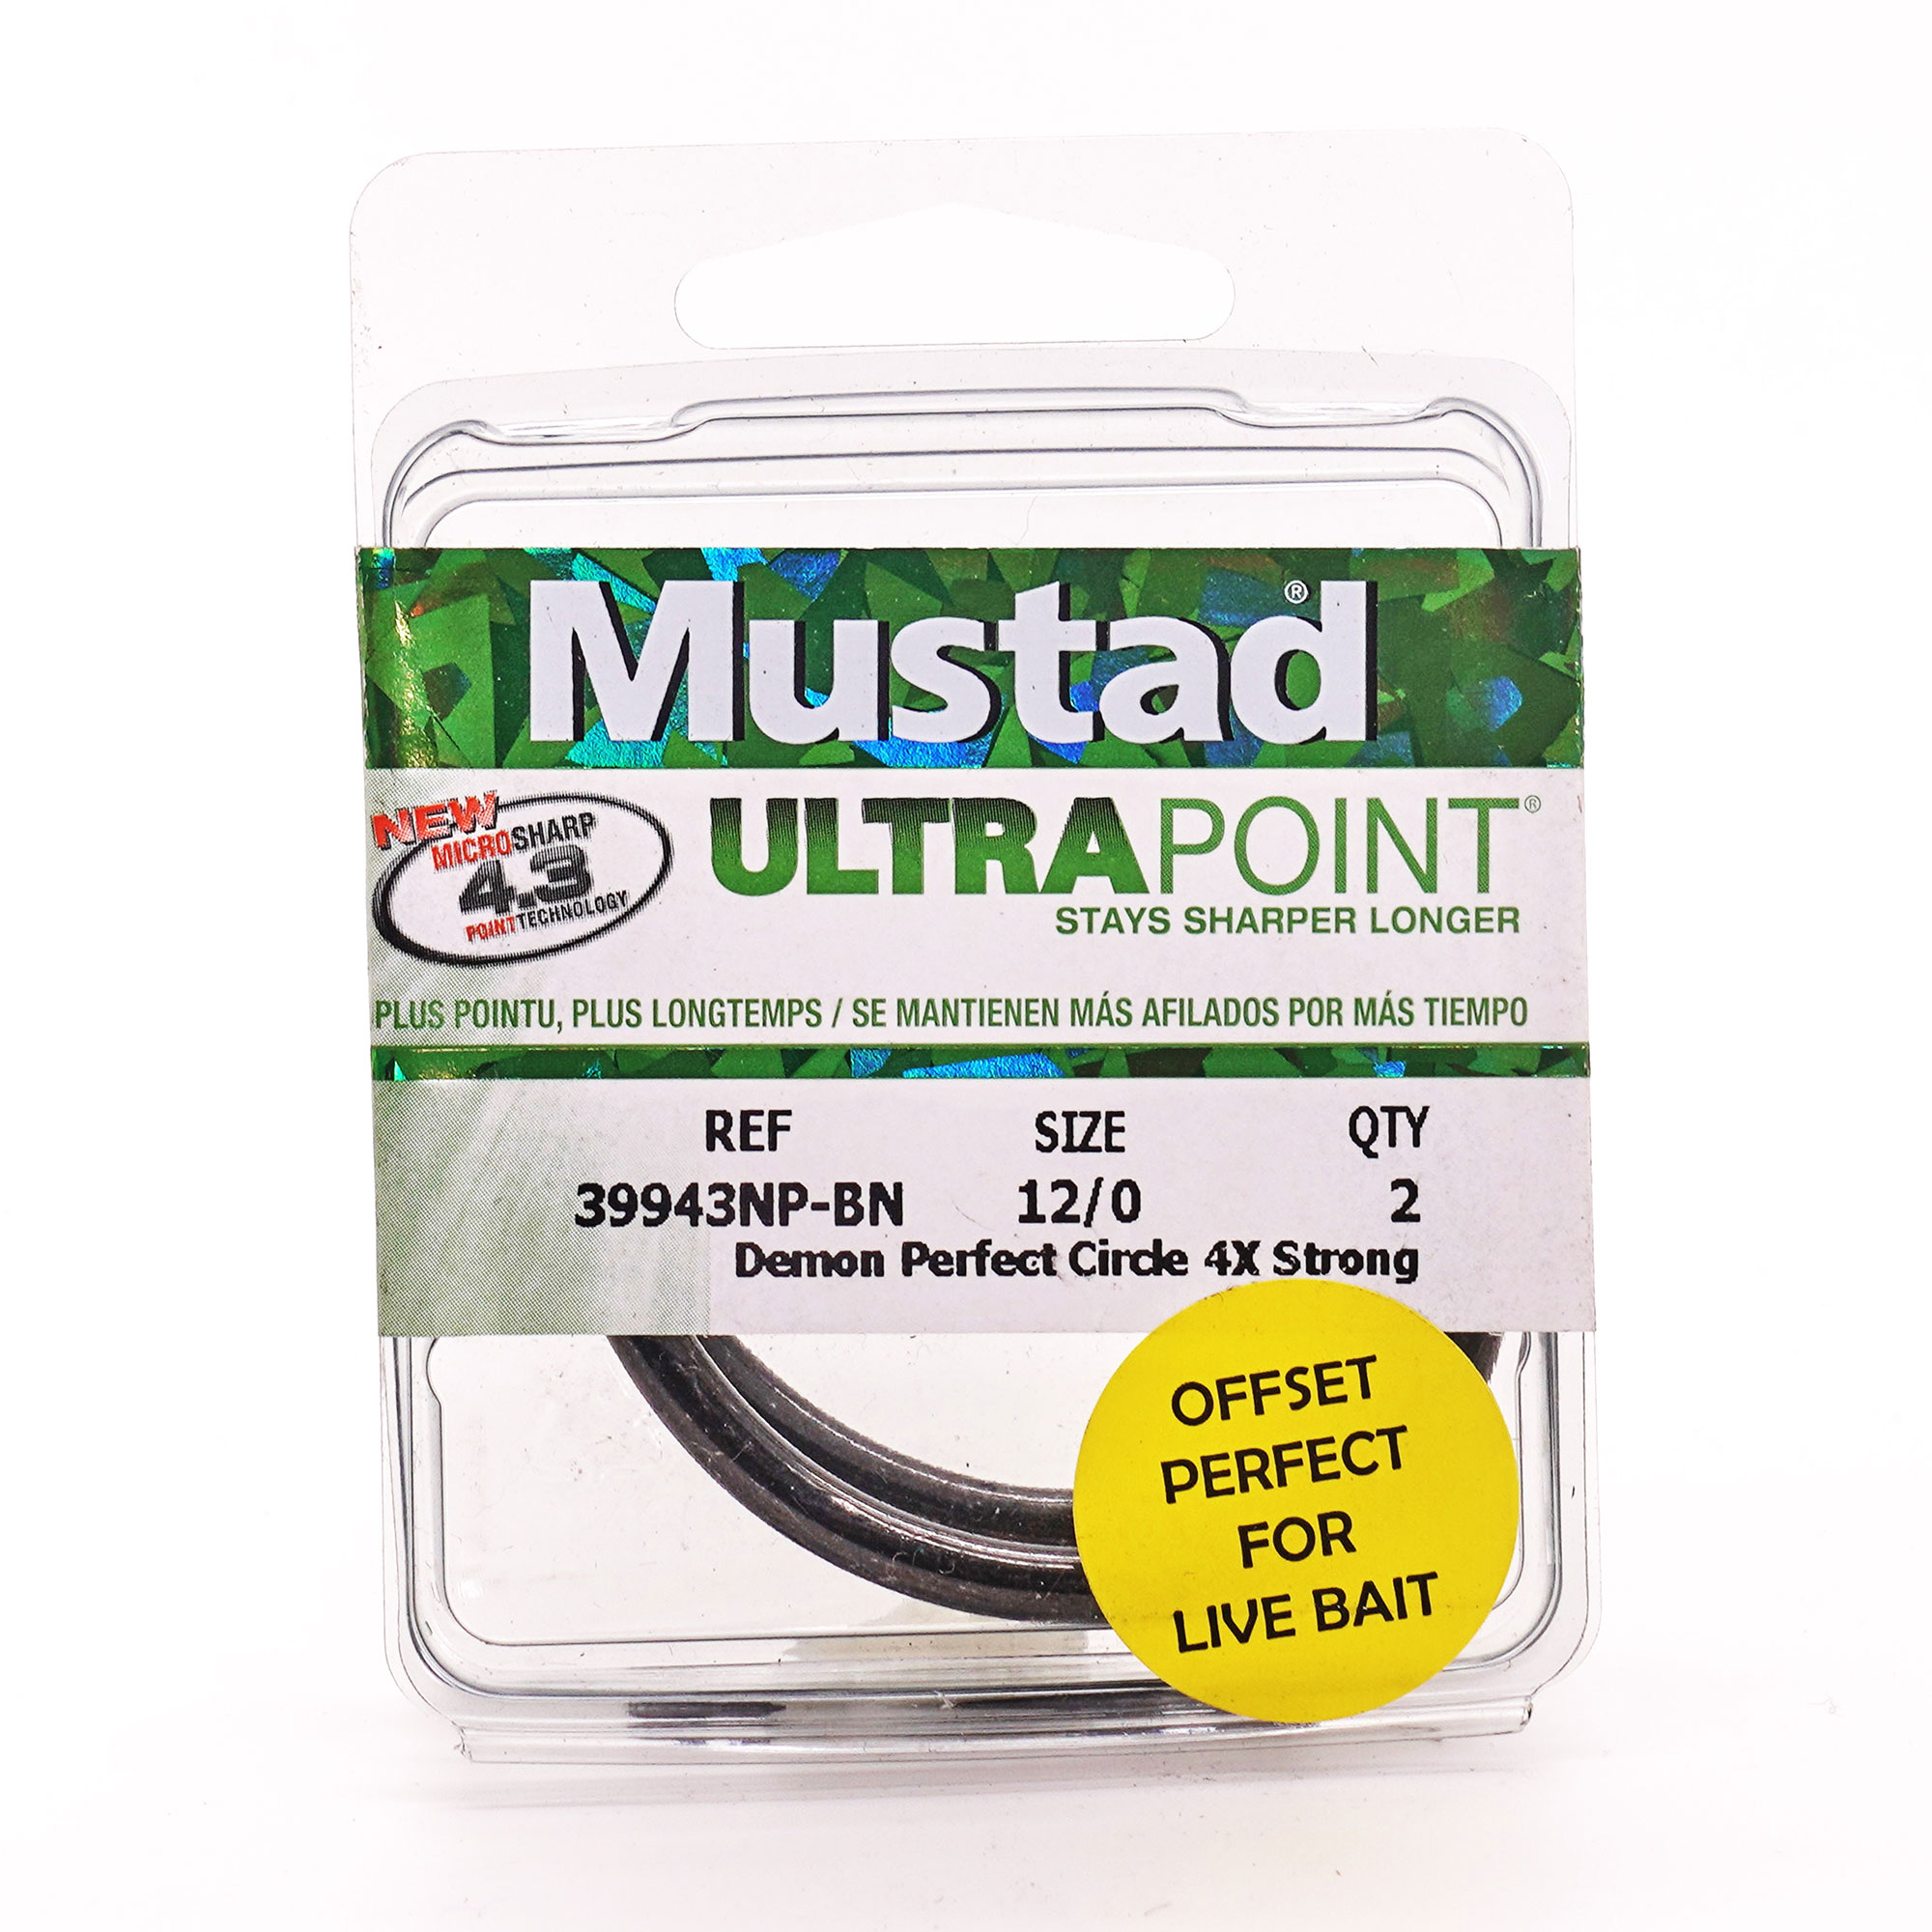 25 Mustad 39941 Ultra Point Size 2/0 2X Strong Demon Circle Hooks